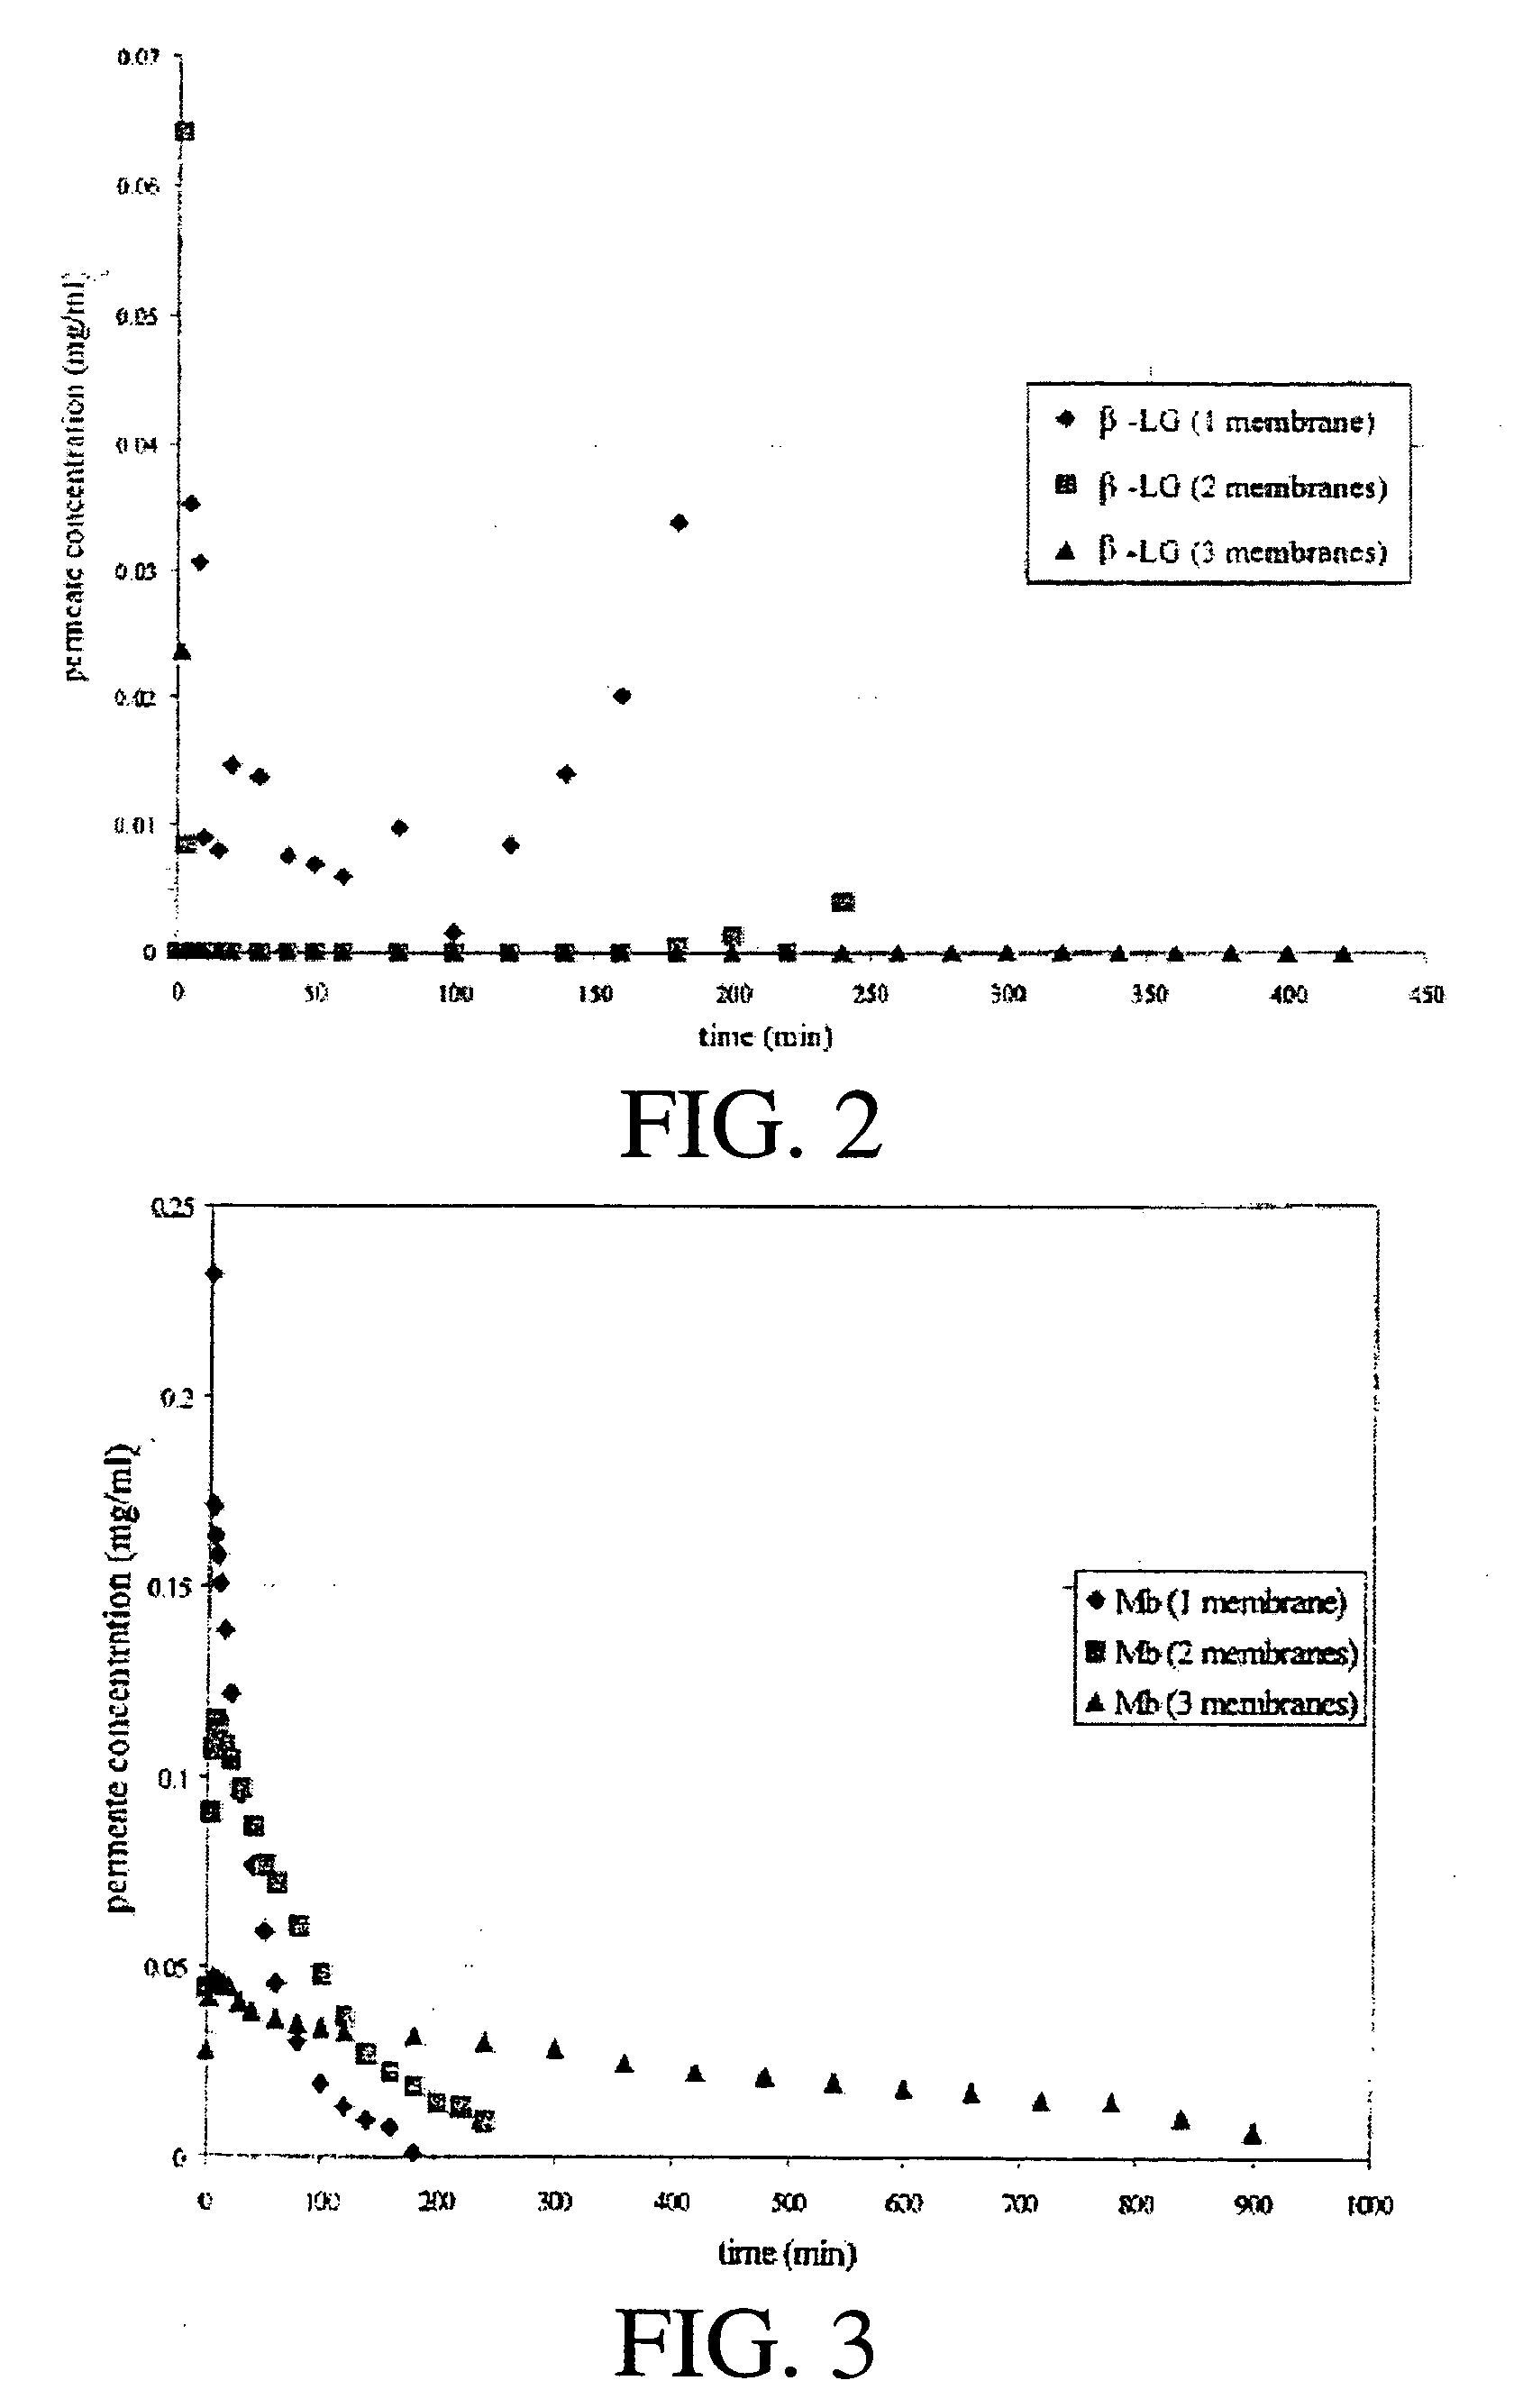 Highly selective membrane systems and methods for protein ultrafiltration